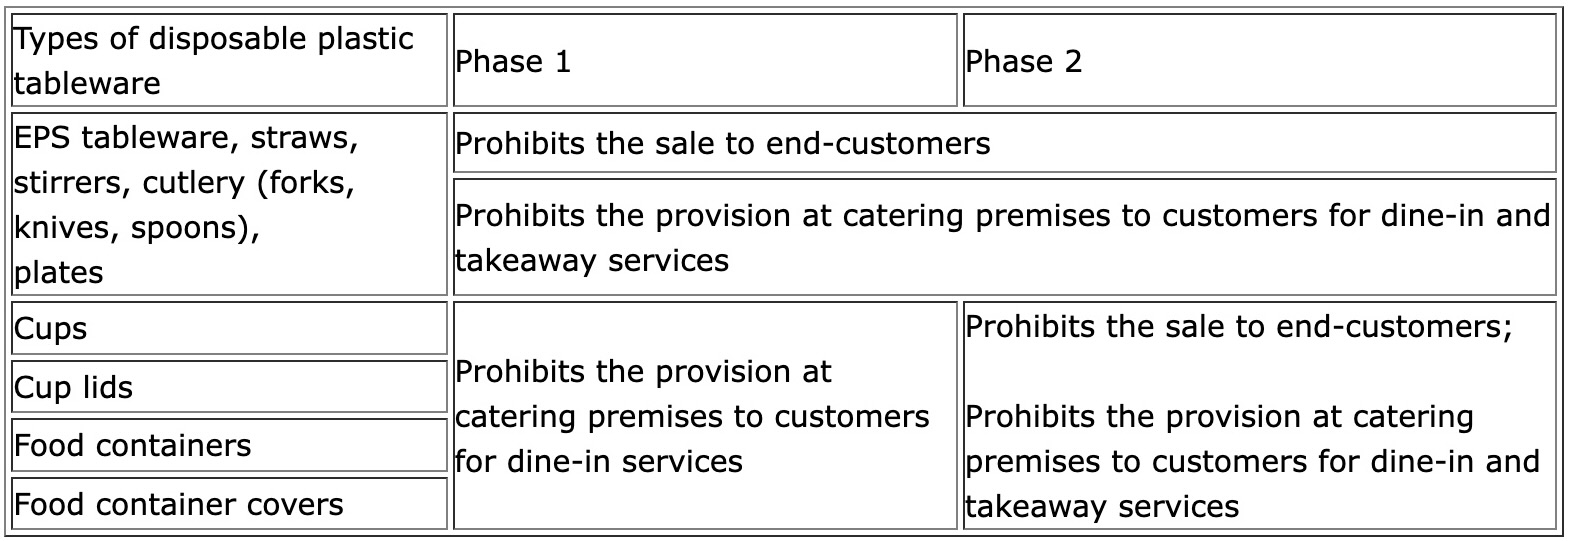 table showing the details of the ban on plastic tableware in hong kong